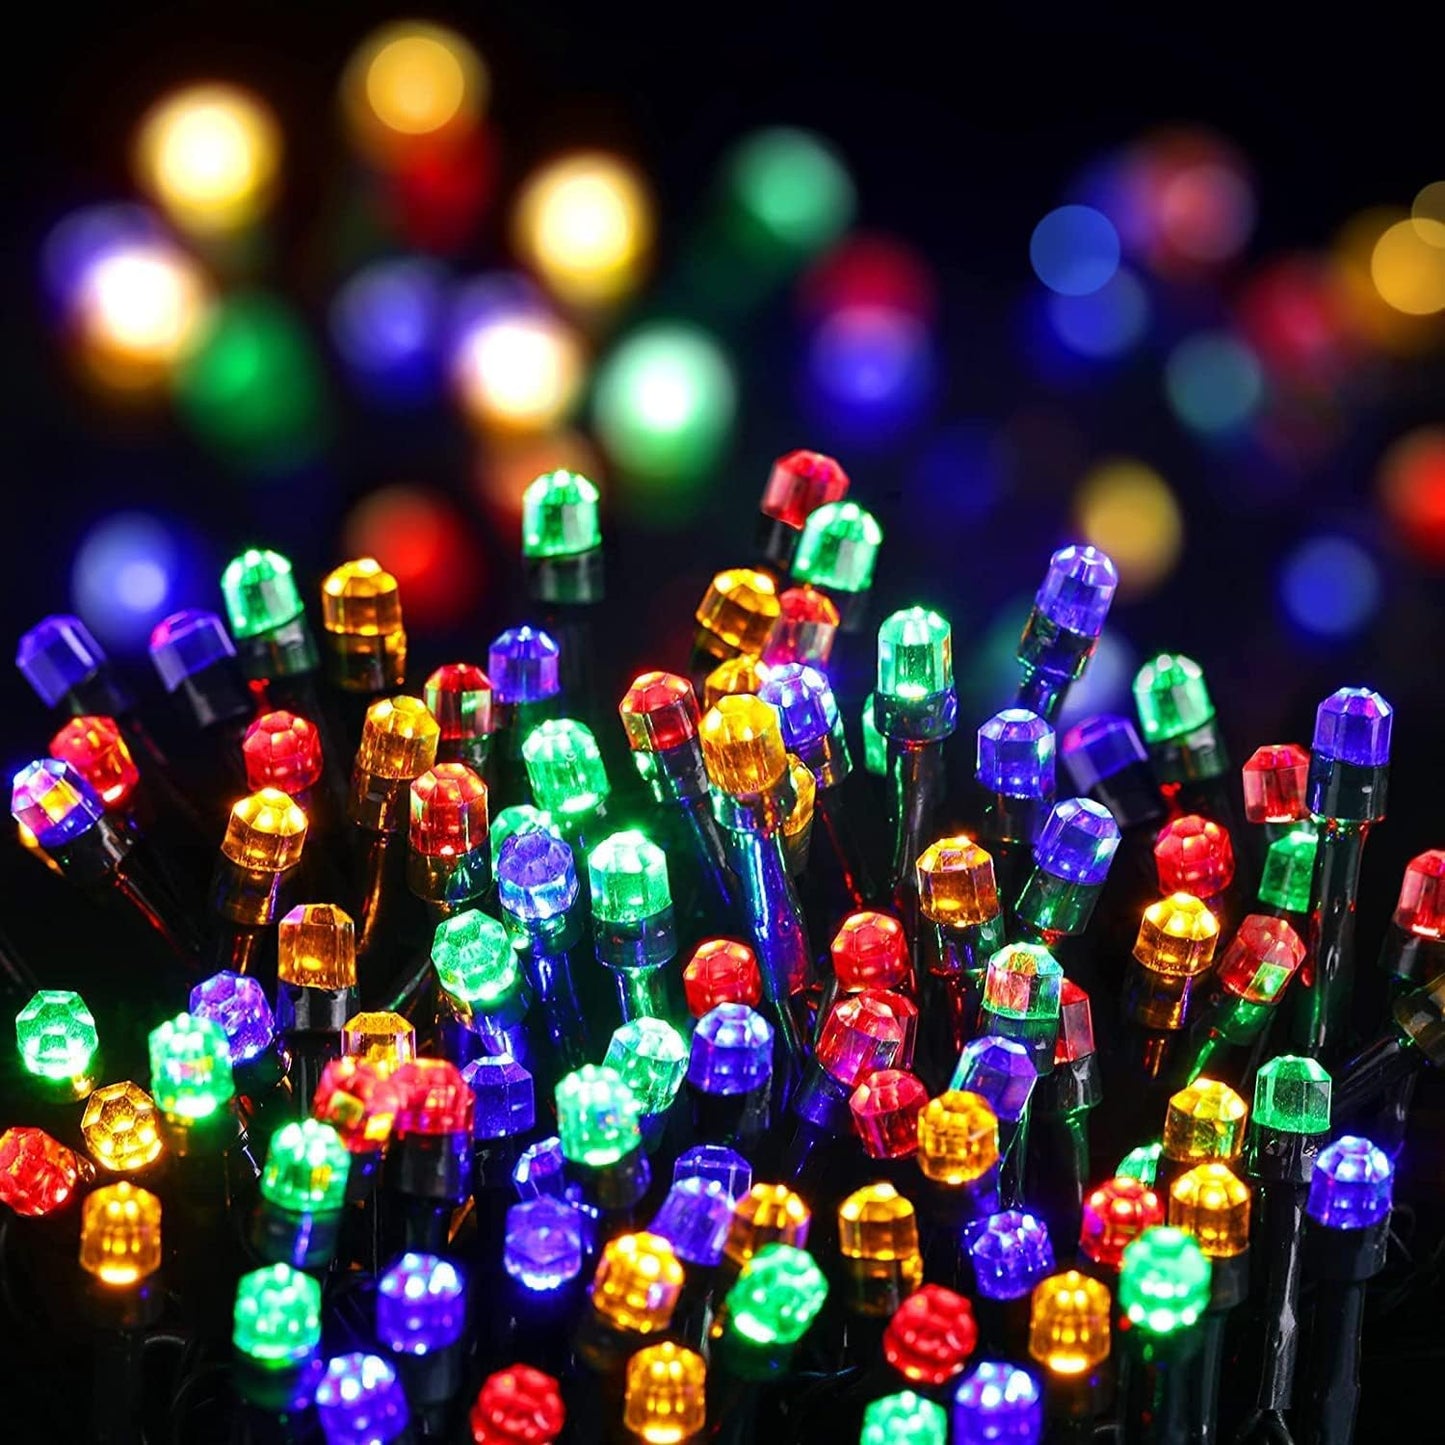 Outdoor Indoor 50 Meter String Lights 200 LEDs 8 Modes Waterproof Decoration Fairy Lights for Patio Wall Party Wedding Diwali Decoration Lights (Multi-Color)